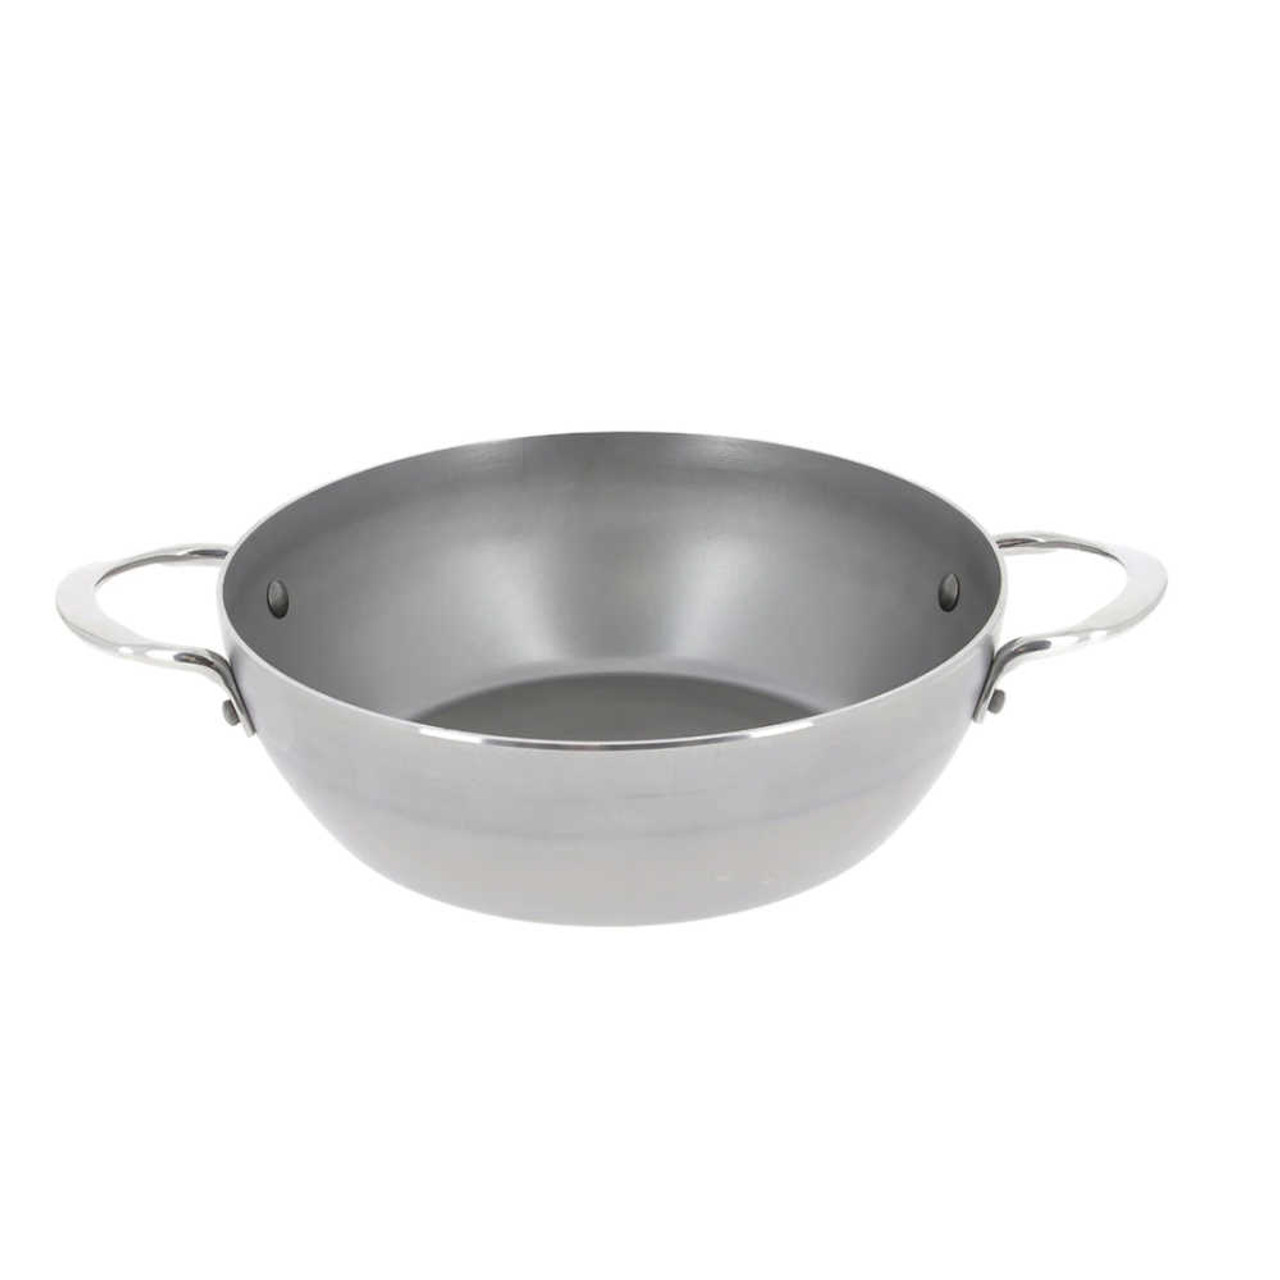 https://cdn11.bigcommerce.com/s-hccytny0od/images/stencil/1280x1280/products/4770/19451/de_Buyer_Mineral_B_Carbon_Steel_2-Handle_Country_Fry_Pan__10677.1653095875.jpg?c=2?imbypass=on